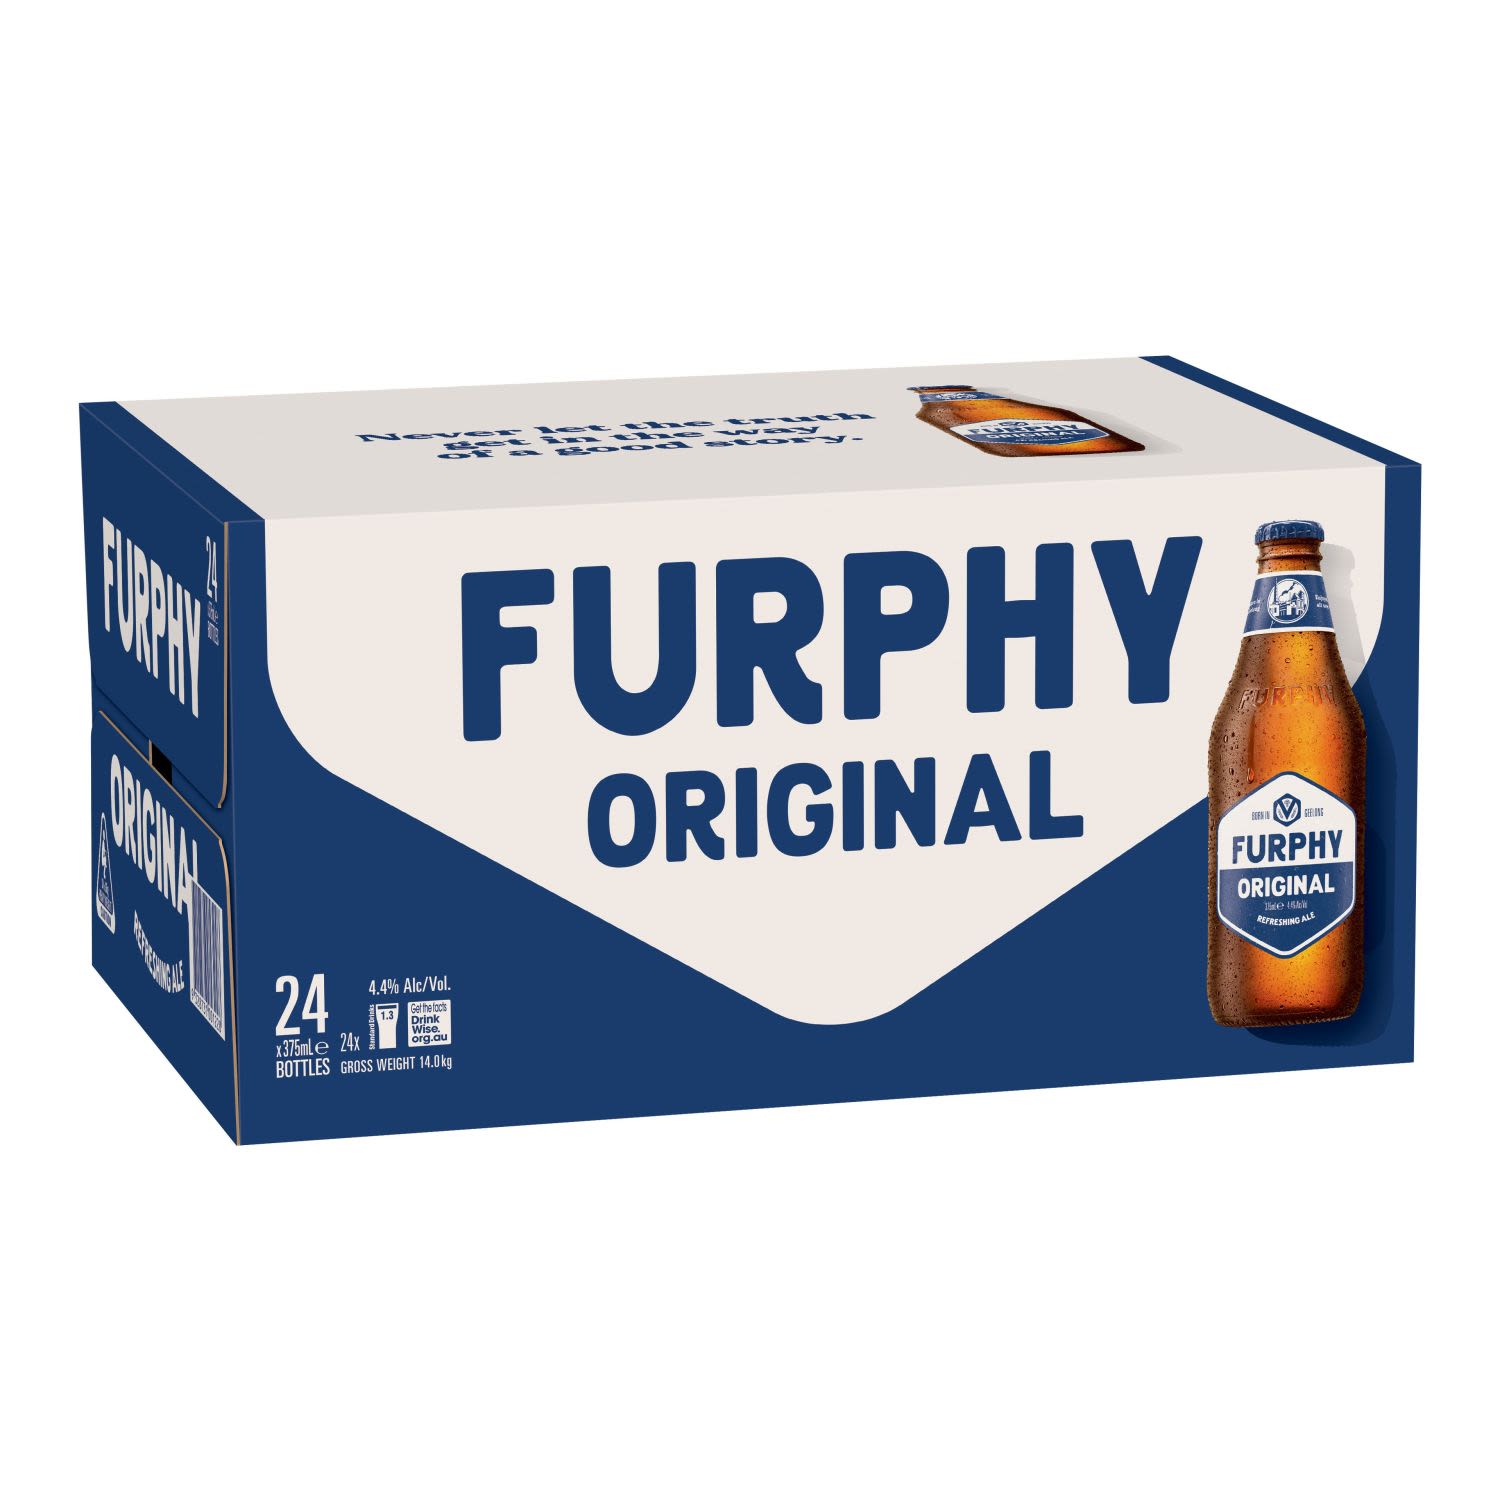 Specifically designed for the local Geelong market, Furphy Refreshing Ale is a clean and crisp, balanced beer with subtle fruit flavours and aromas.<br /> <br />Alcohol Volume: 4.40%<br /><br />Pack Format: 24 Pack<br /><br />Standard Drinks: 1.3<br /><br />Pack Type: Bottle<br /><br />Country of Origin: Australia<br />